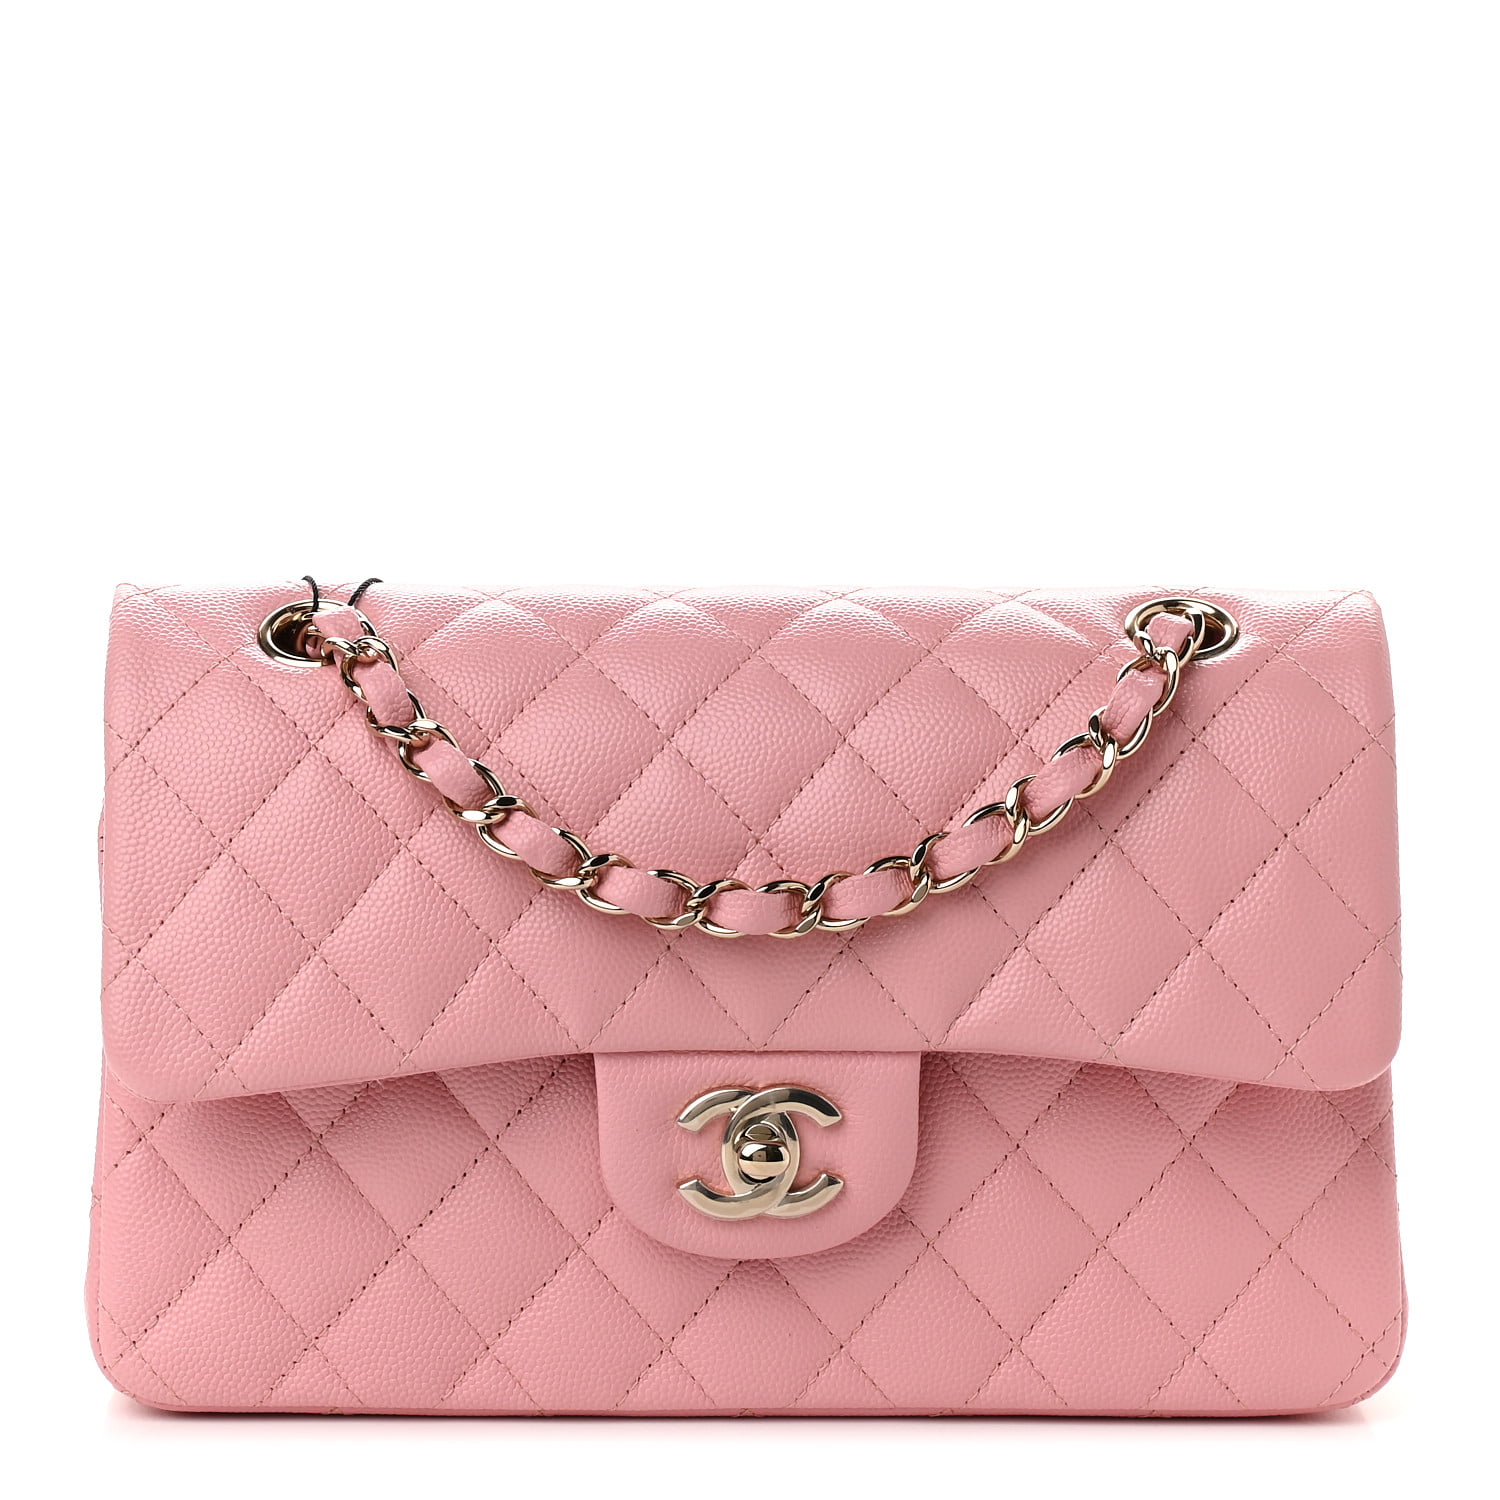 UNBOXING MY NEW BARBIE PINK CHANEL CLASSIC FLAP!!!!